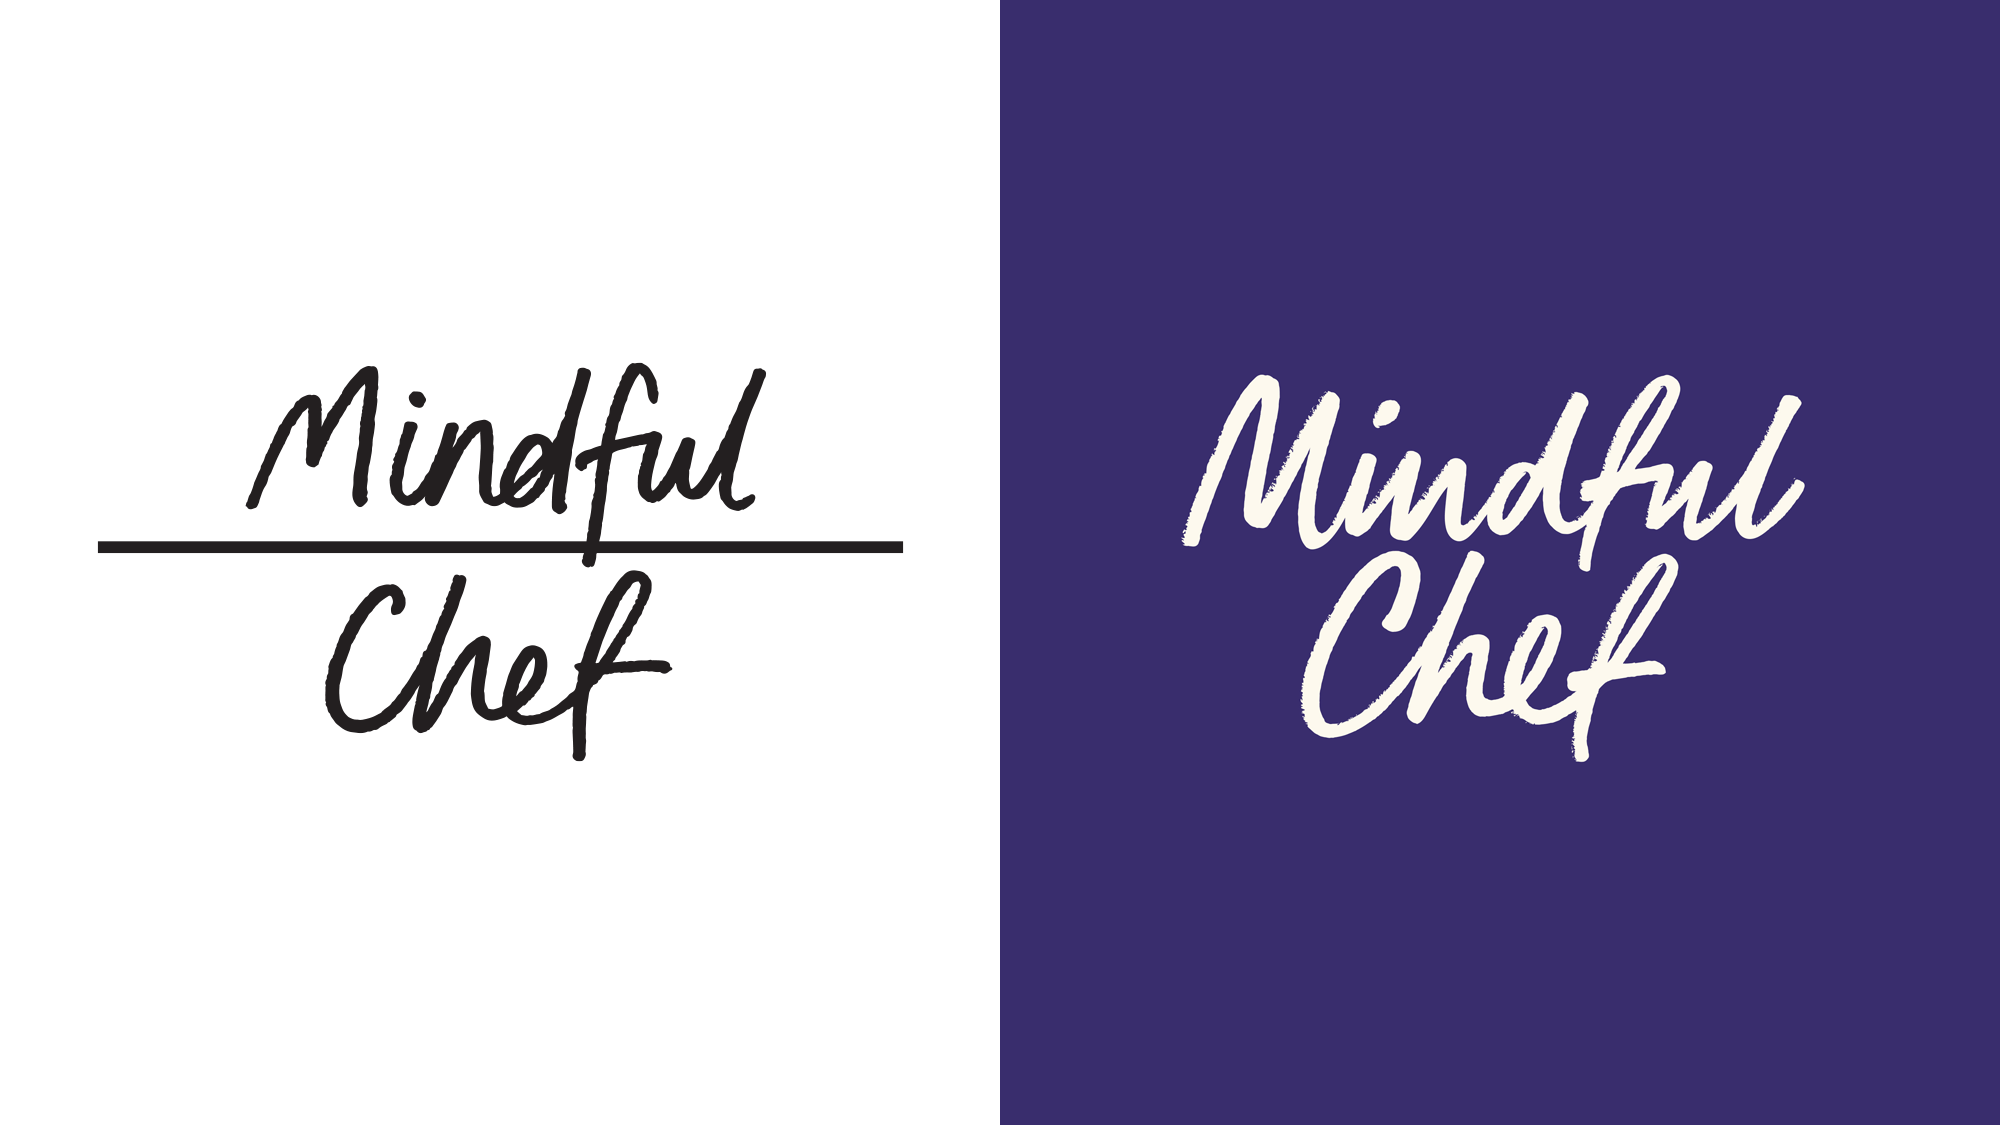 Brand New: New Logo and Identity for Mindful Chef by Ragged Edge